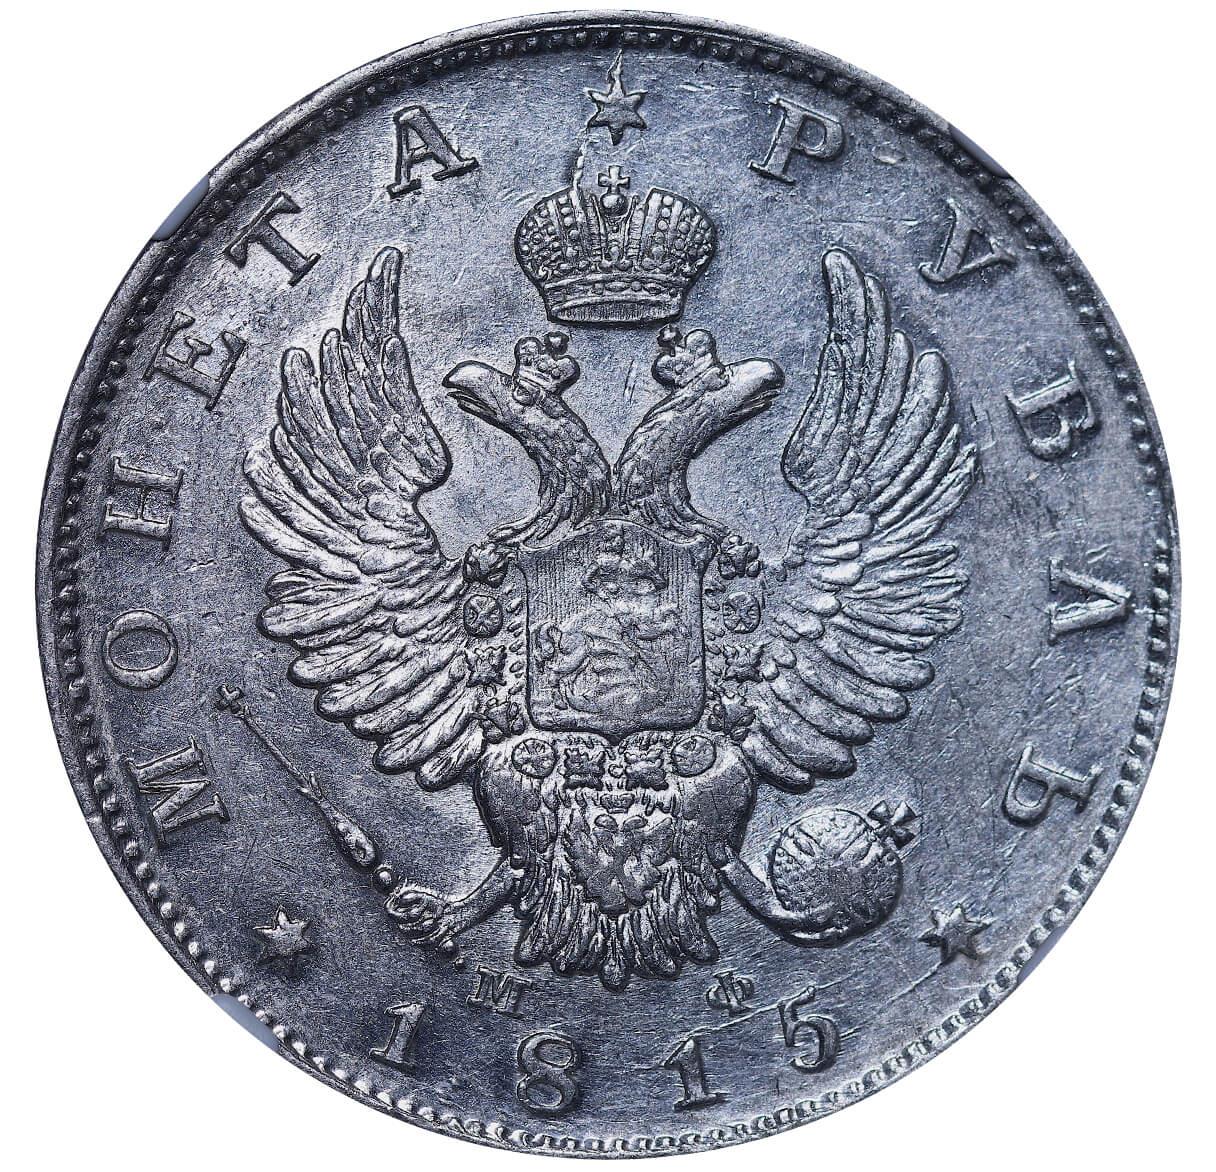 Russian Empire, 1 Rouble, 1815 year, SPB-MF, NGC, AU 58 - Image 2 of 3